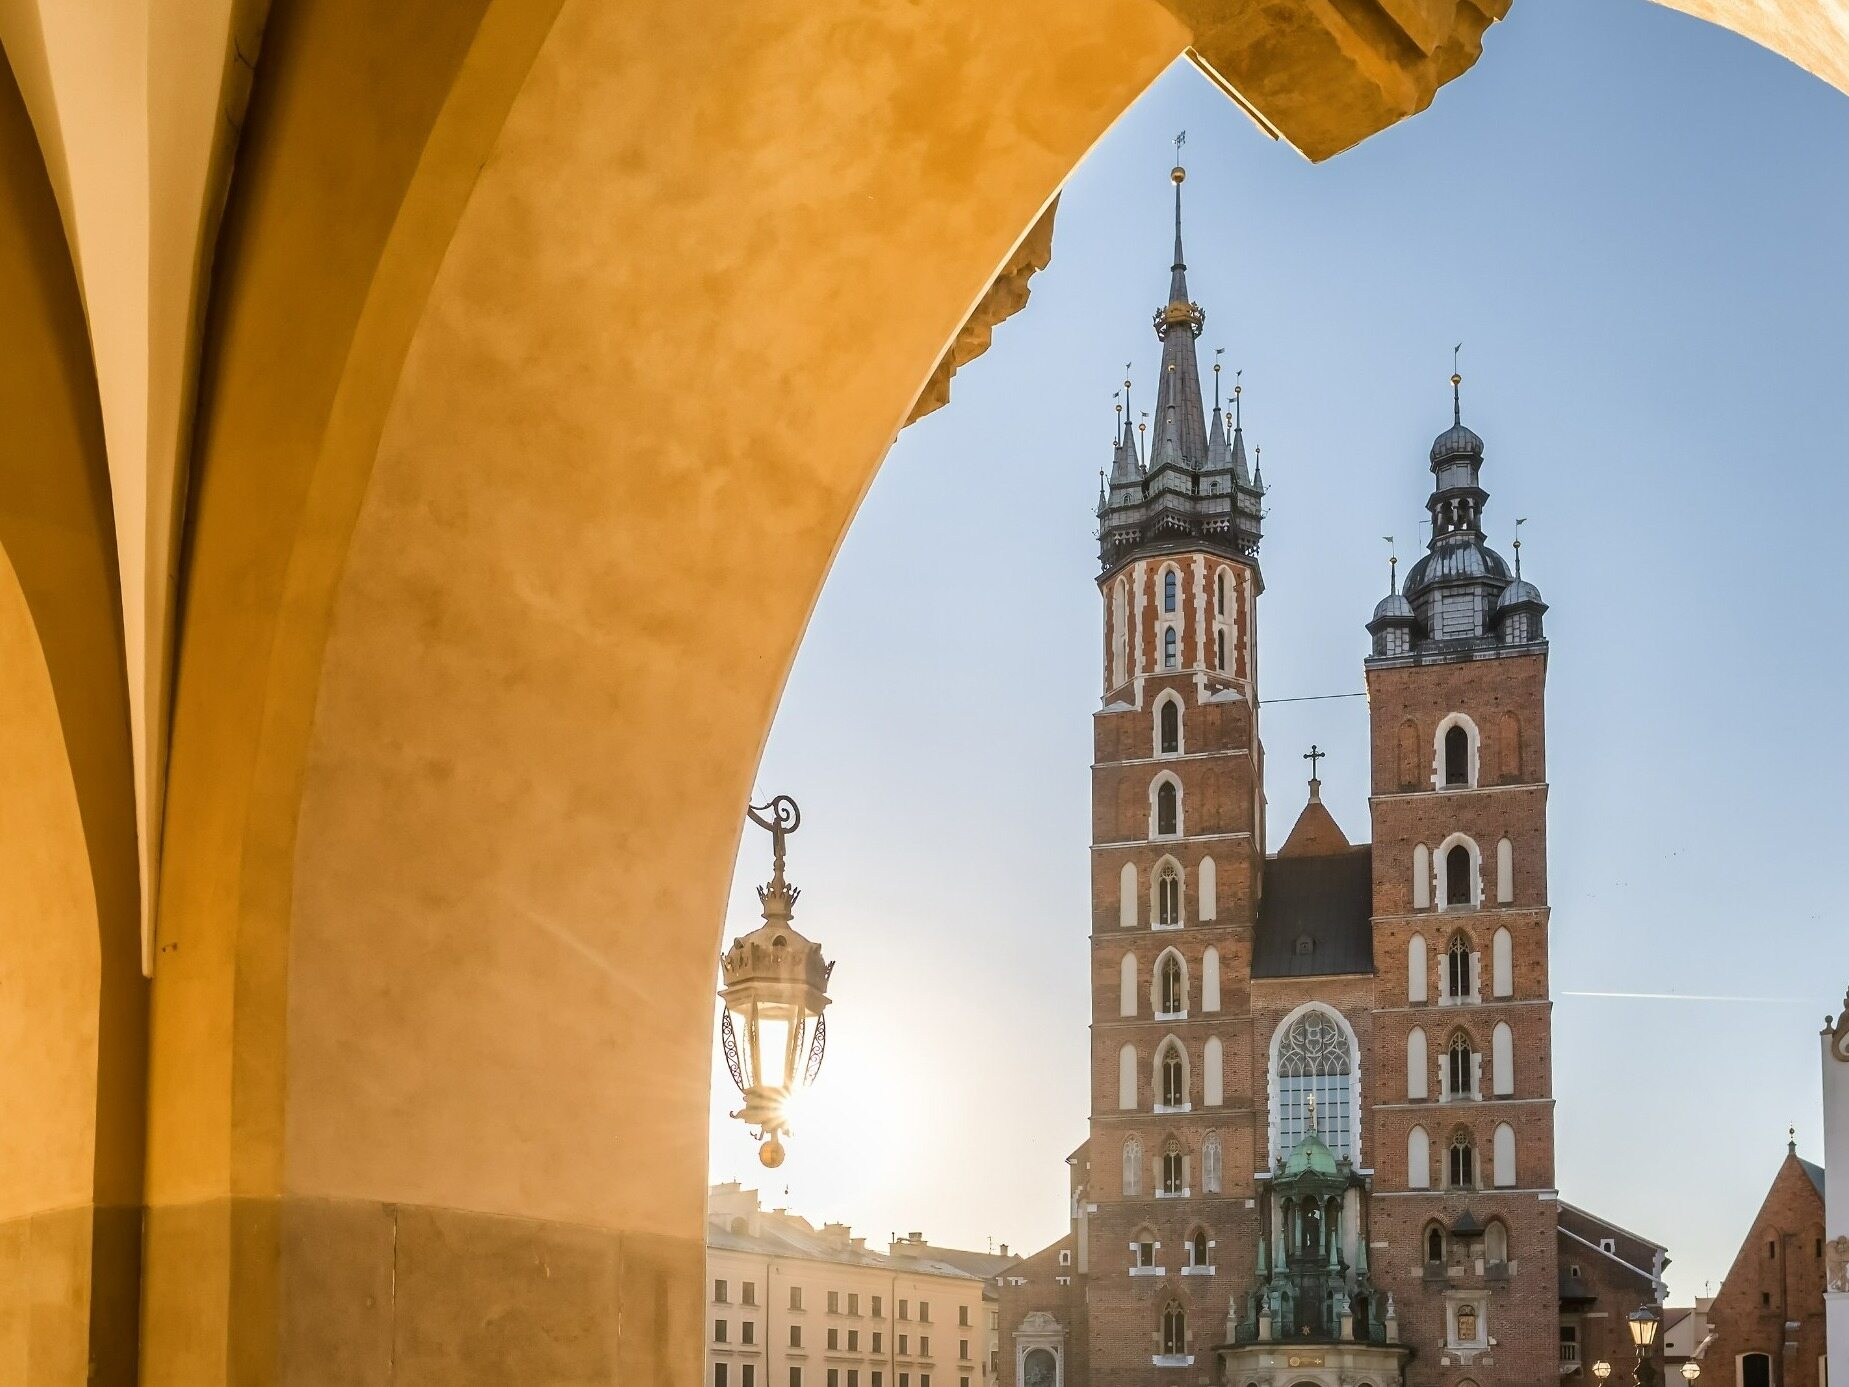 The new attraction will delight tourists.  A dragon trail is being created in Krakow